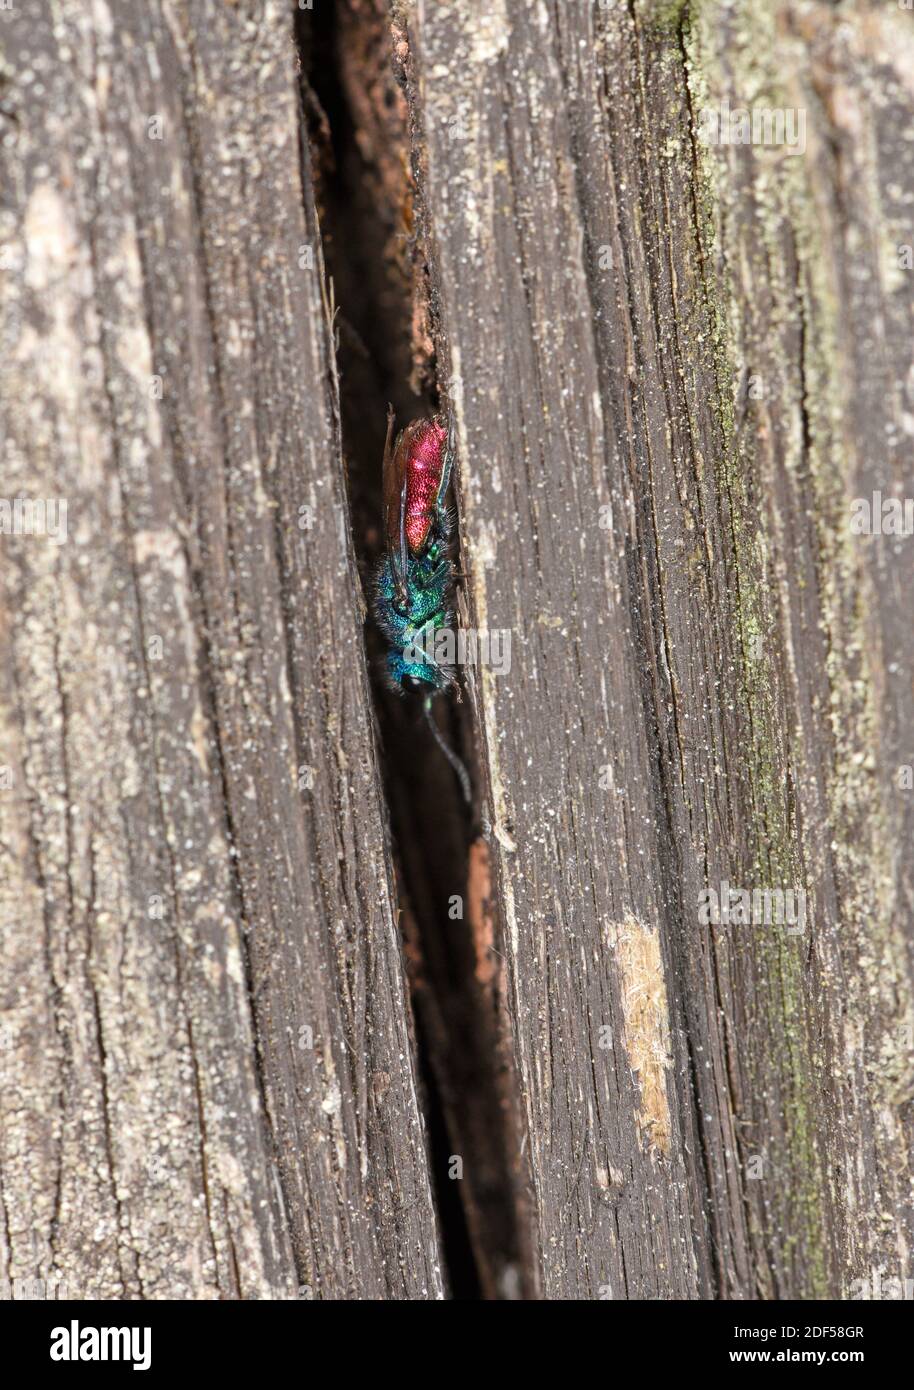 Ruby-tailed Jewel Wasp (Chrysis ignita) ruht in Riss in Holz, Wales, Mai Stockfoto